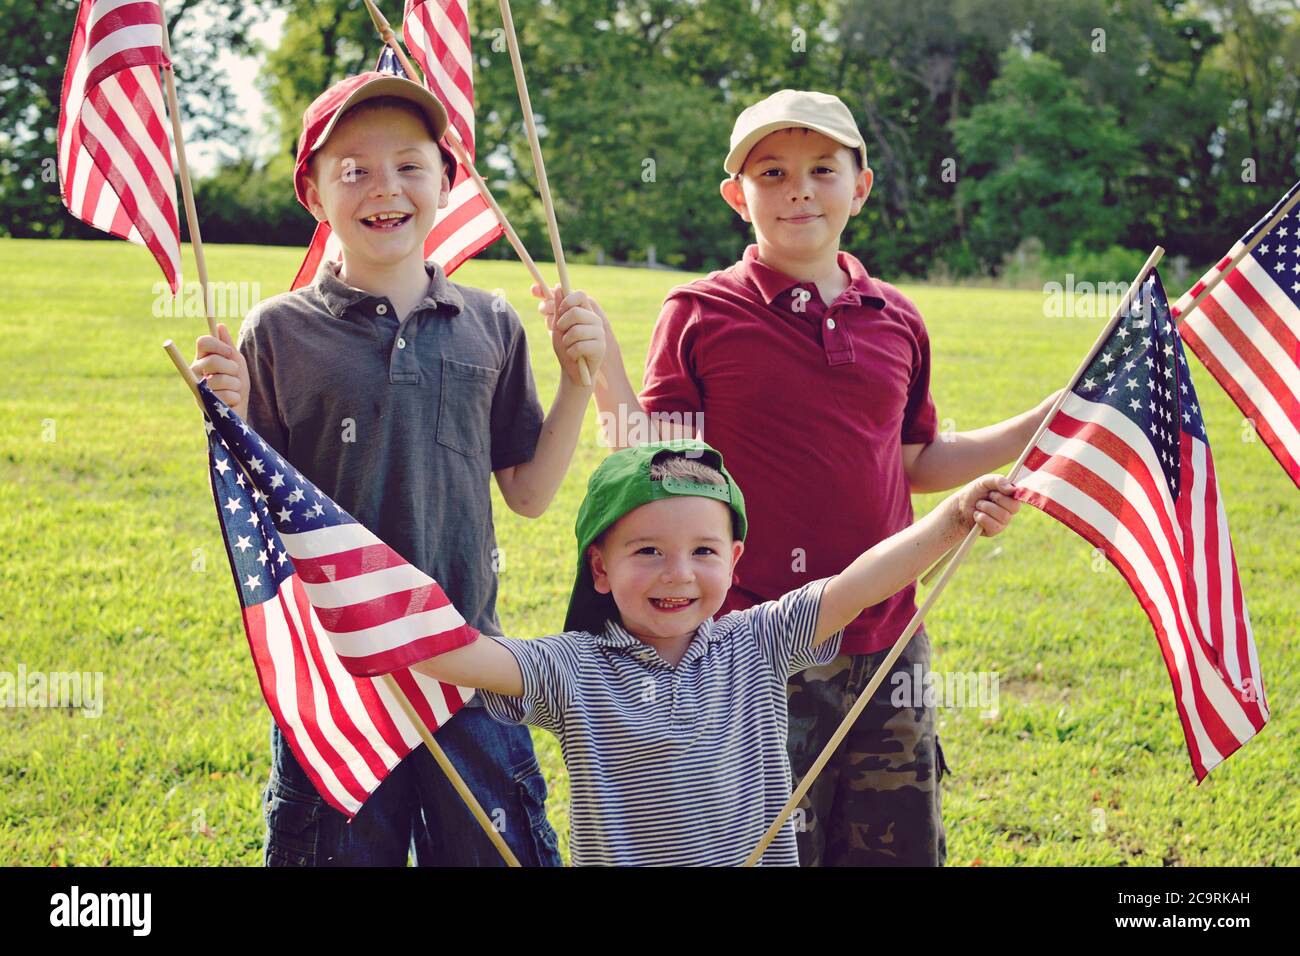 Three boys holding American Flags enthusiastically while waving them Stock Photo